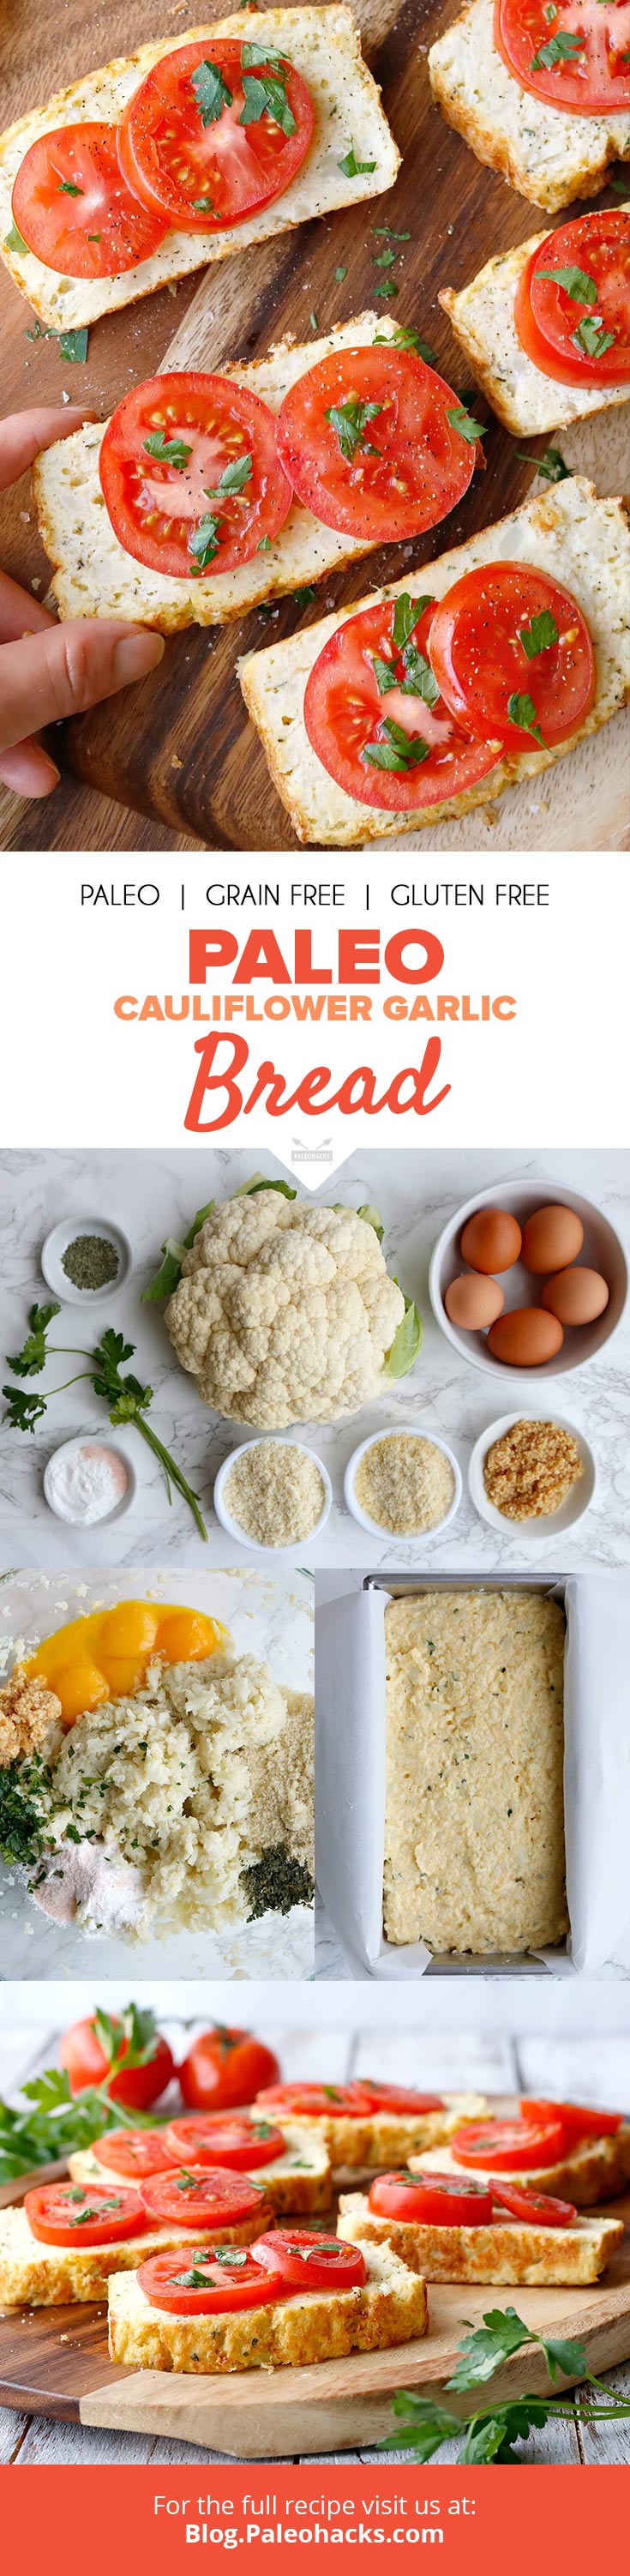 Slice up this fluffy, herb-rich garlic bread made from whipped eggs and healthy cauliflower.